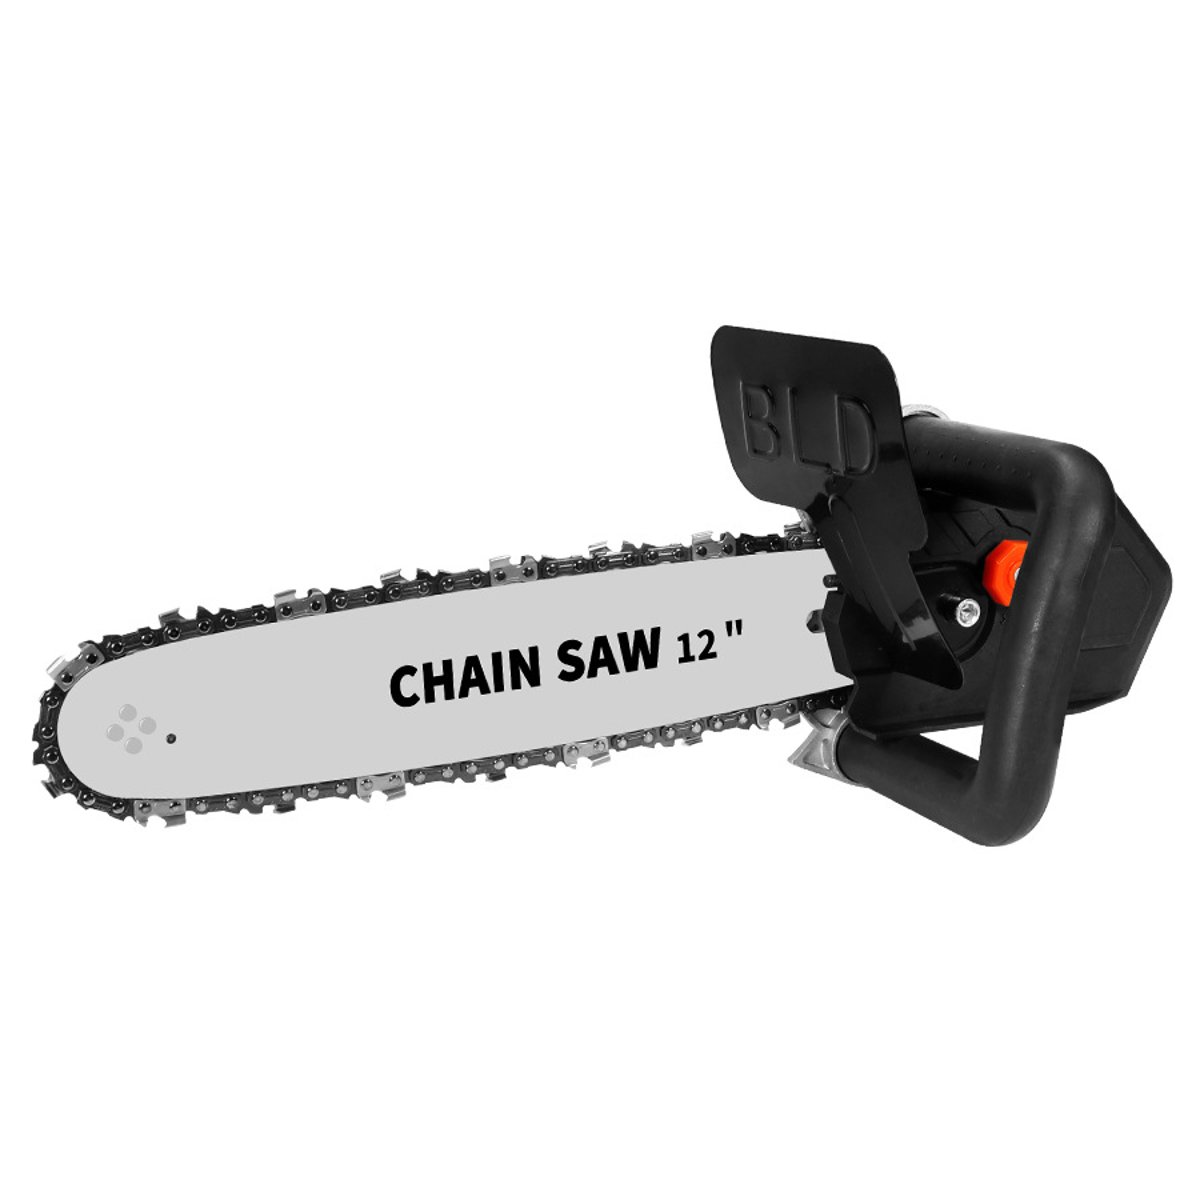 12-Inch-Chainsaw-Bracket-Electric-Chain-Saw-Stand-Set-Part-For-100-Angle-Grinder-1755370-11